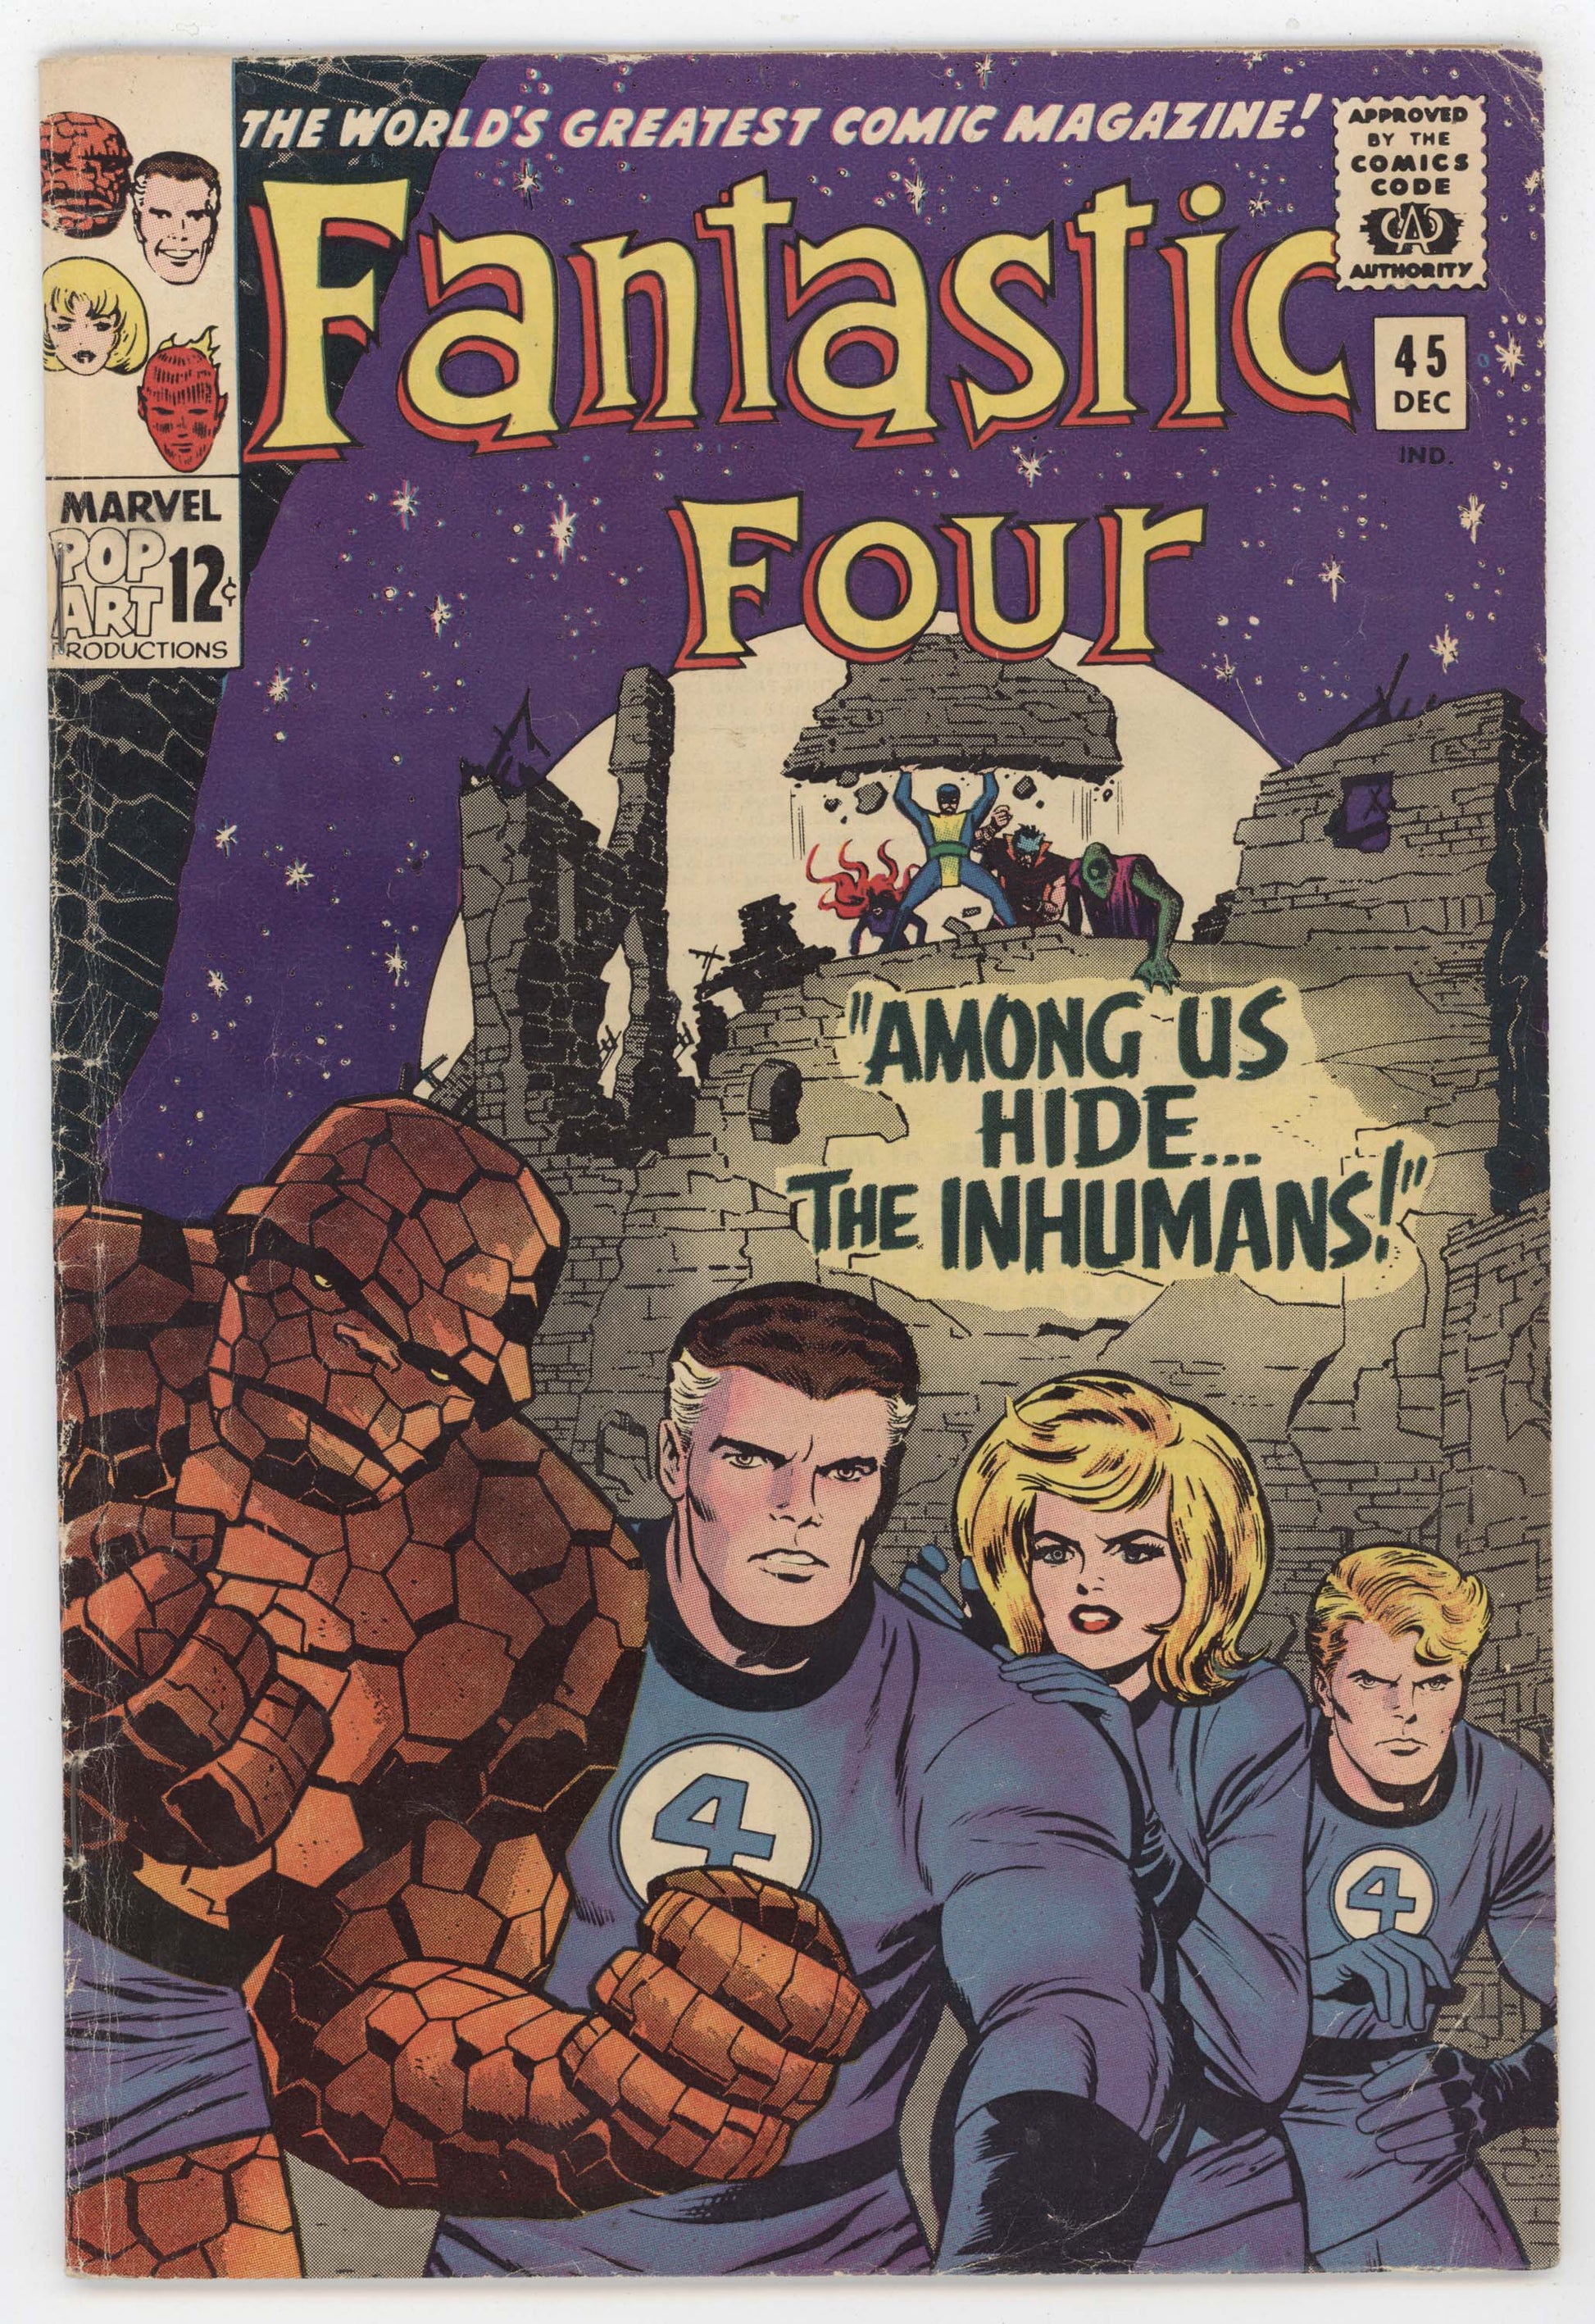 Fantastic Four by Stan Lee, Jack Kirby: 9780143135821 |  : Books